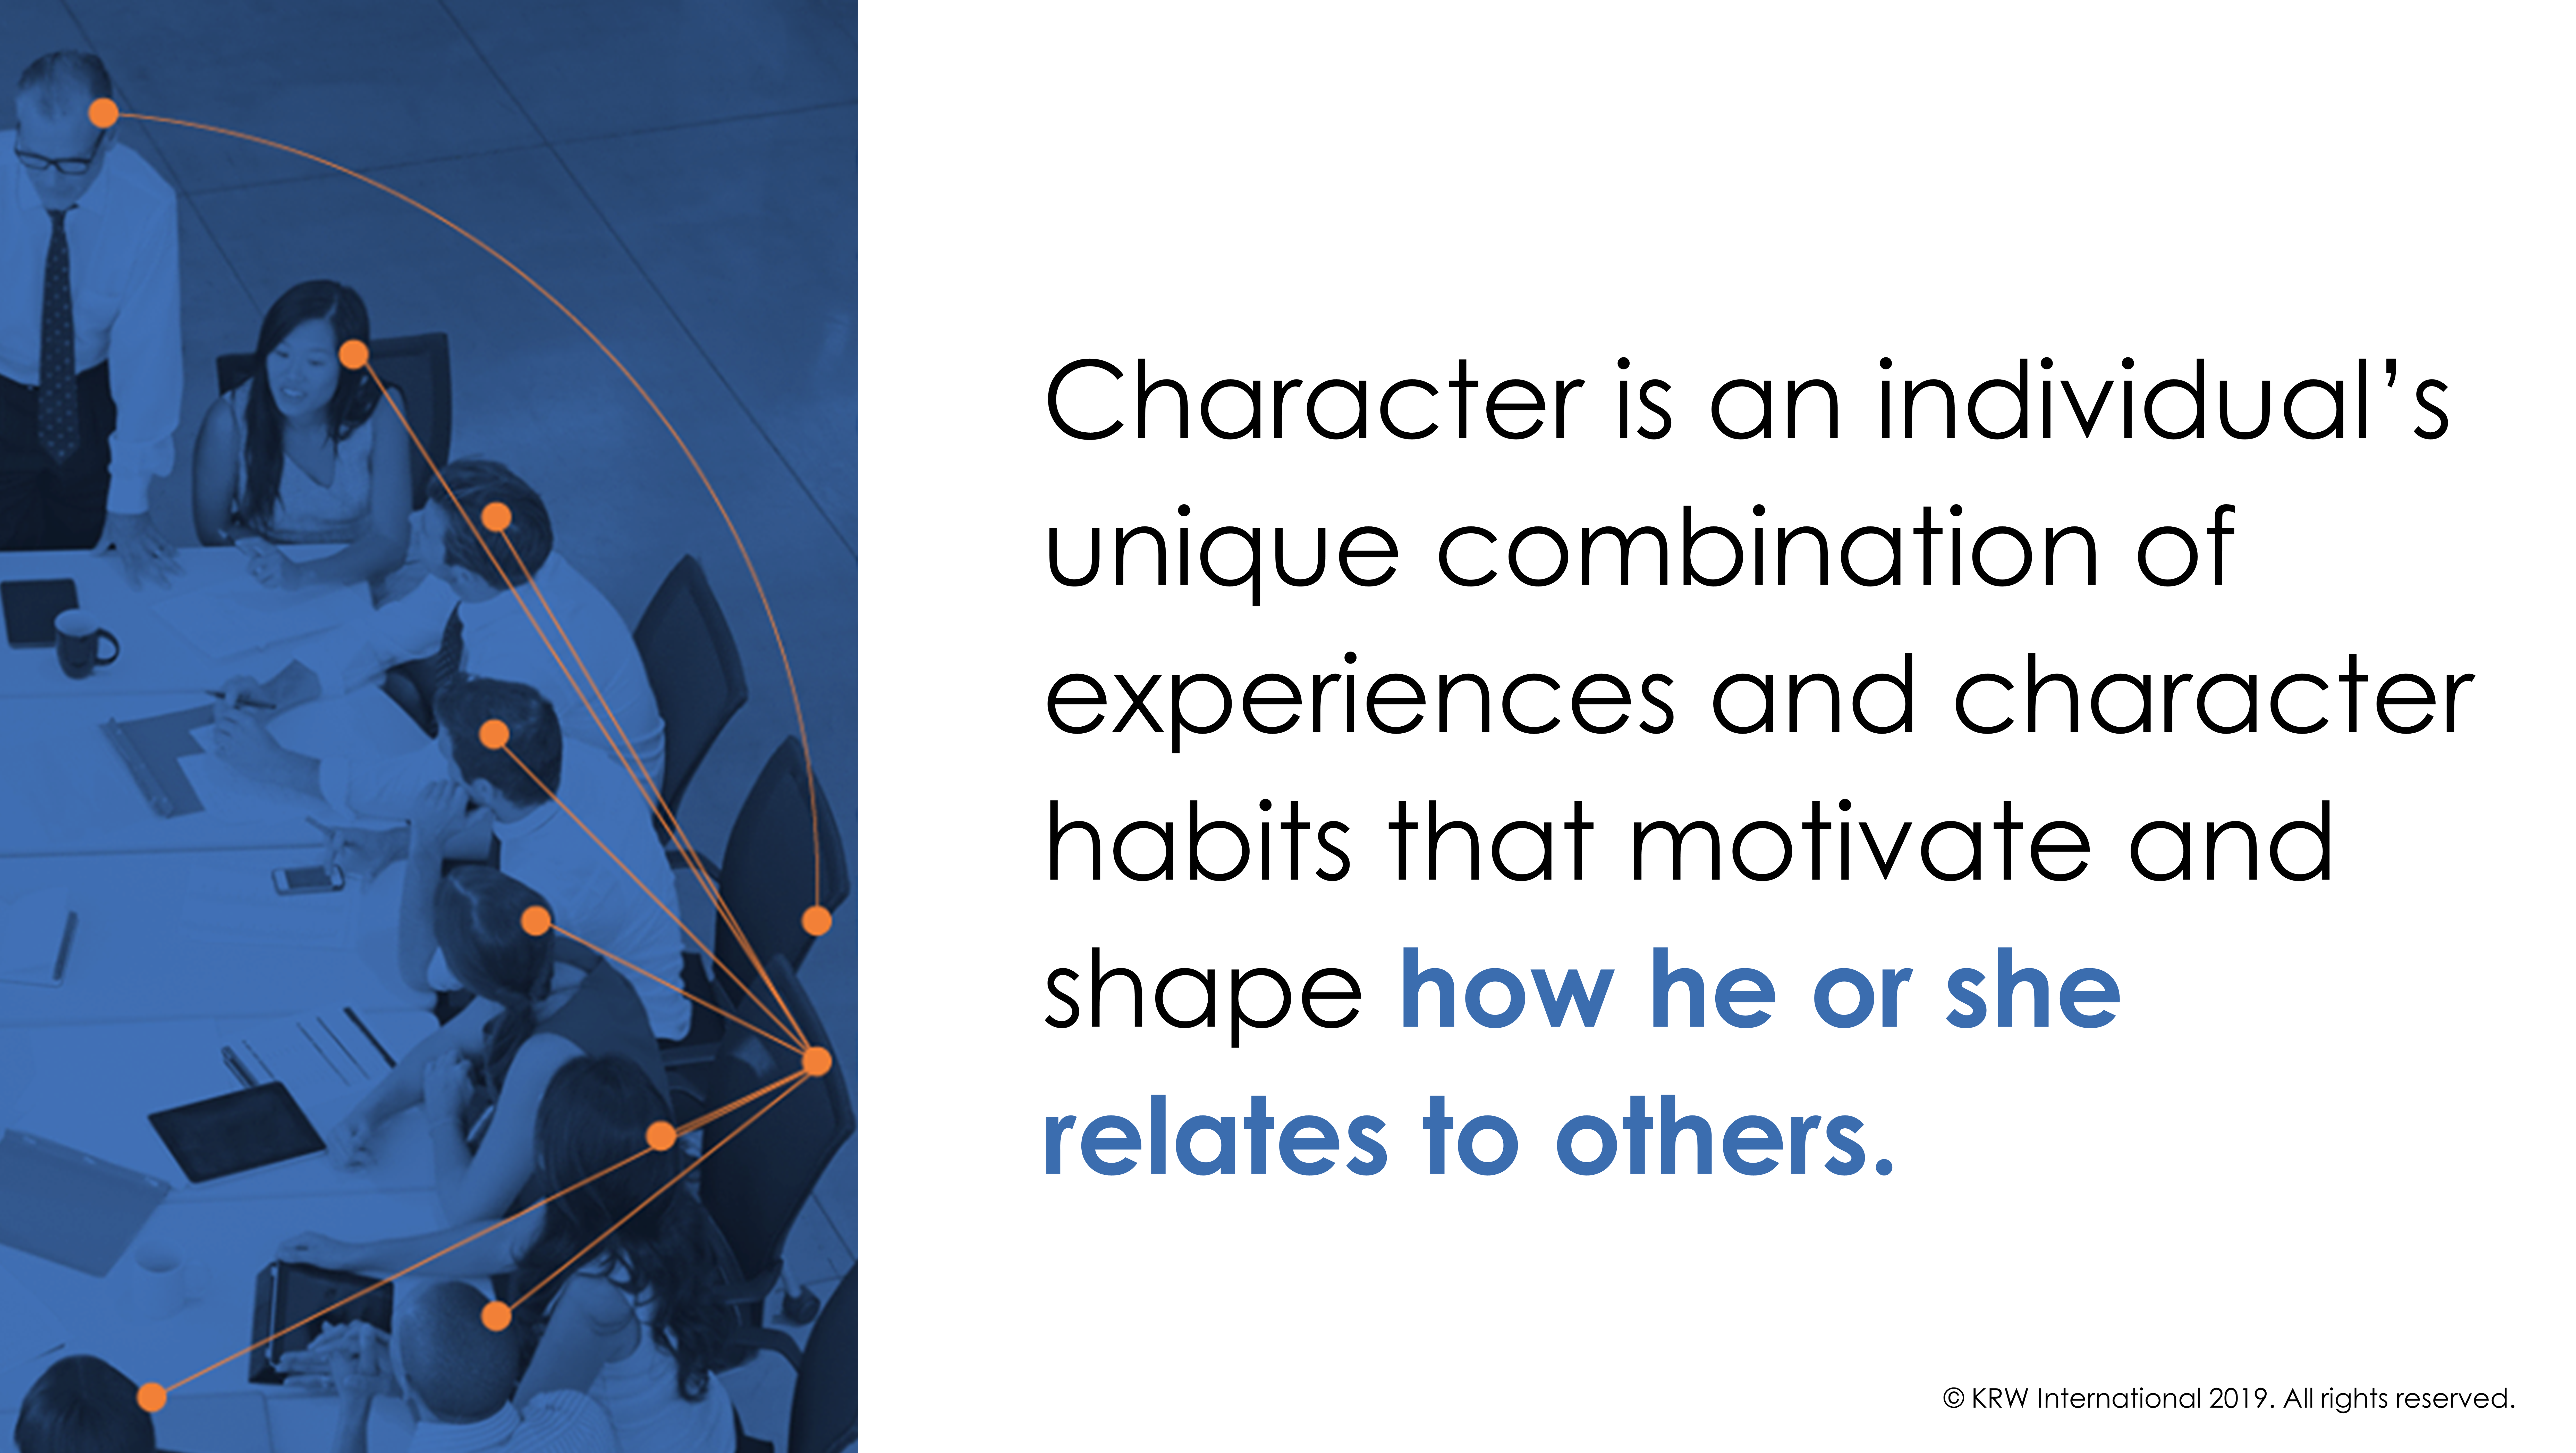 Character is an individual's unique combination of experiences and character habits that motivate and shape how he or she relates to others.